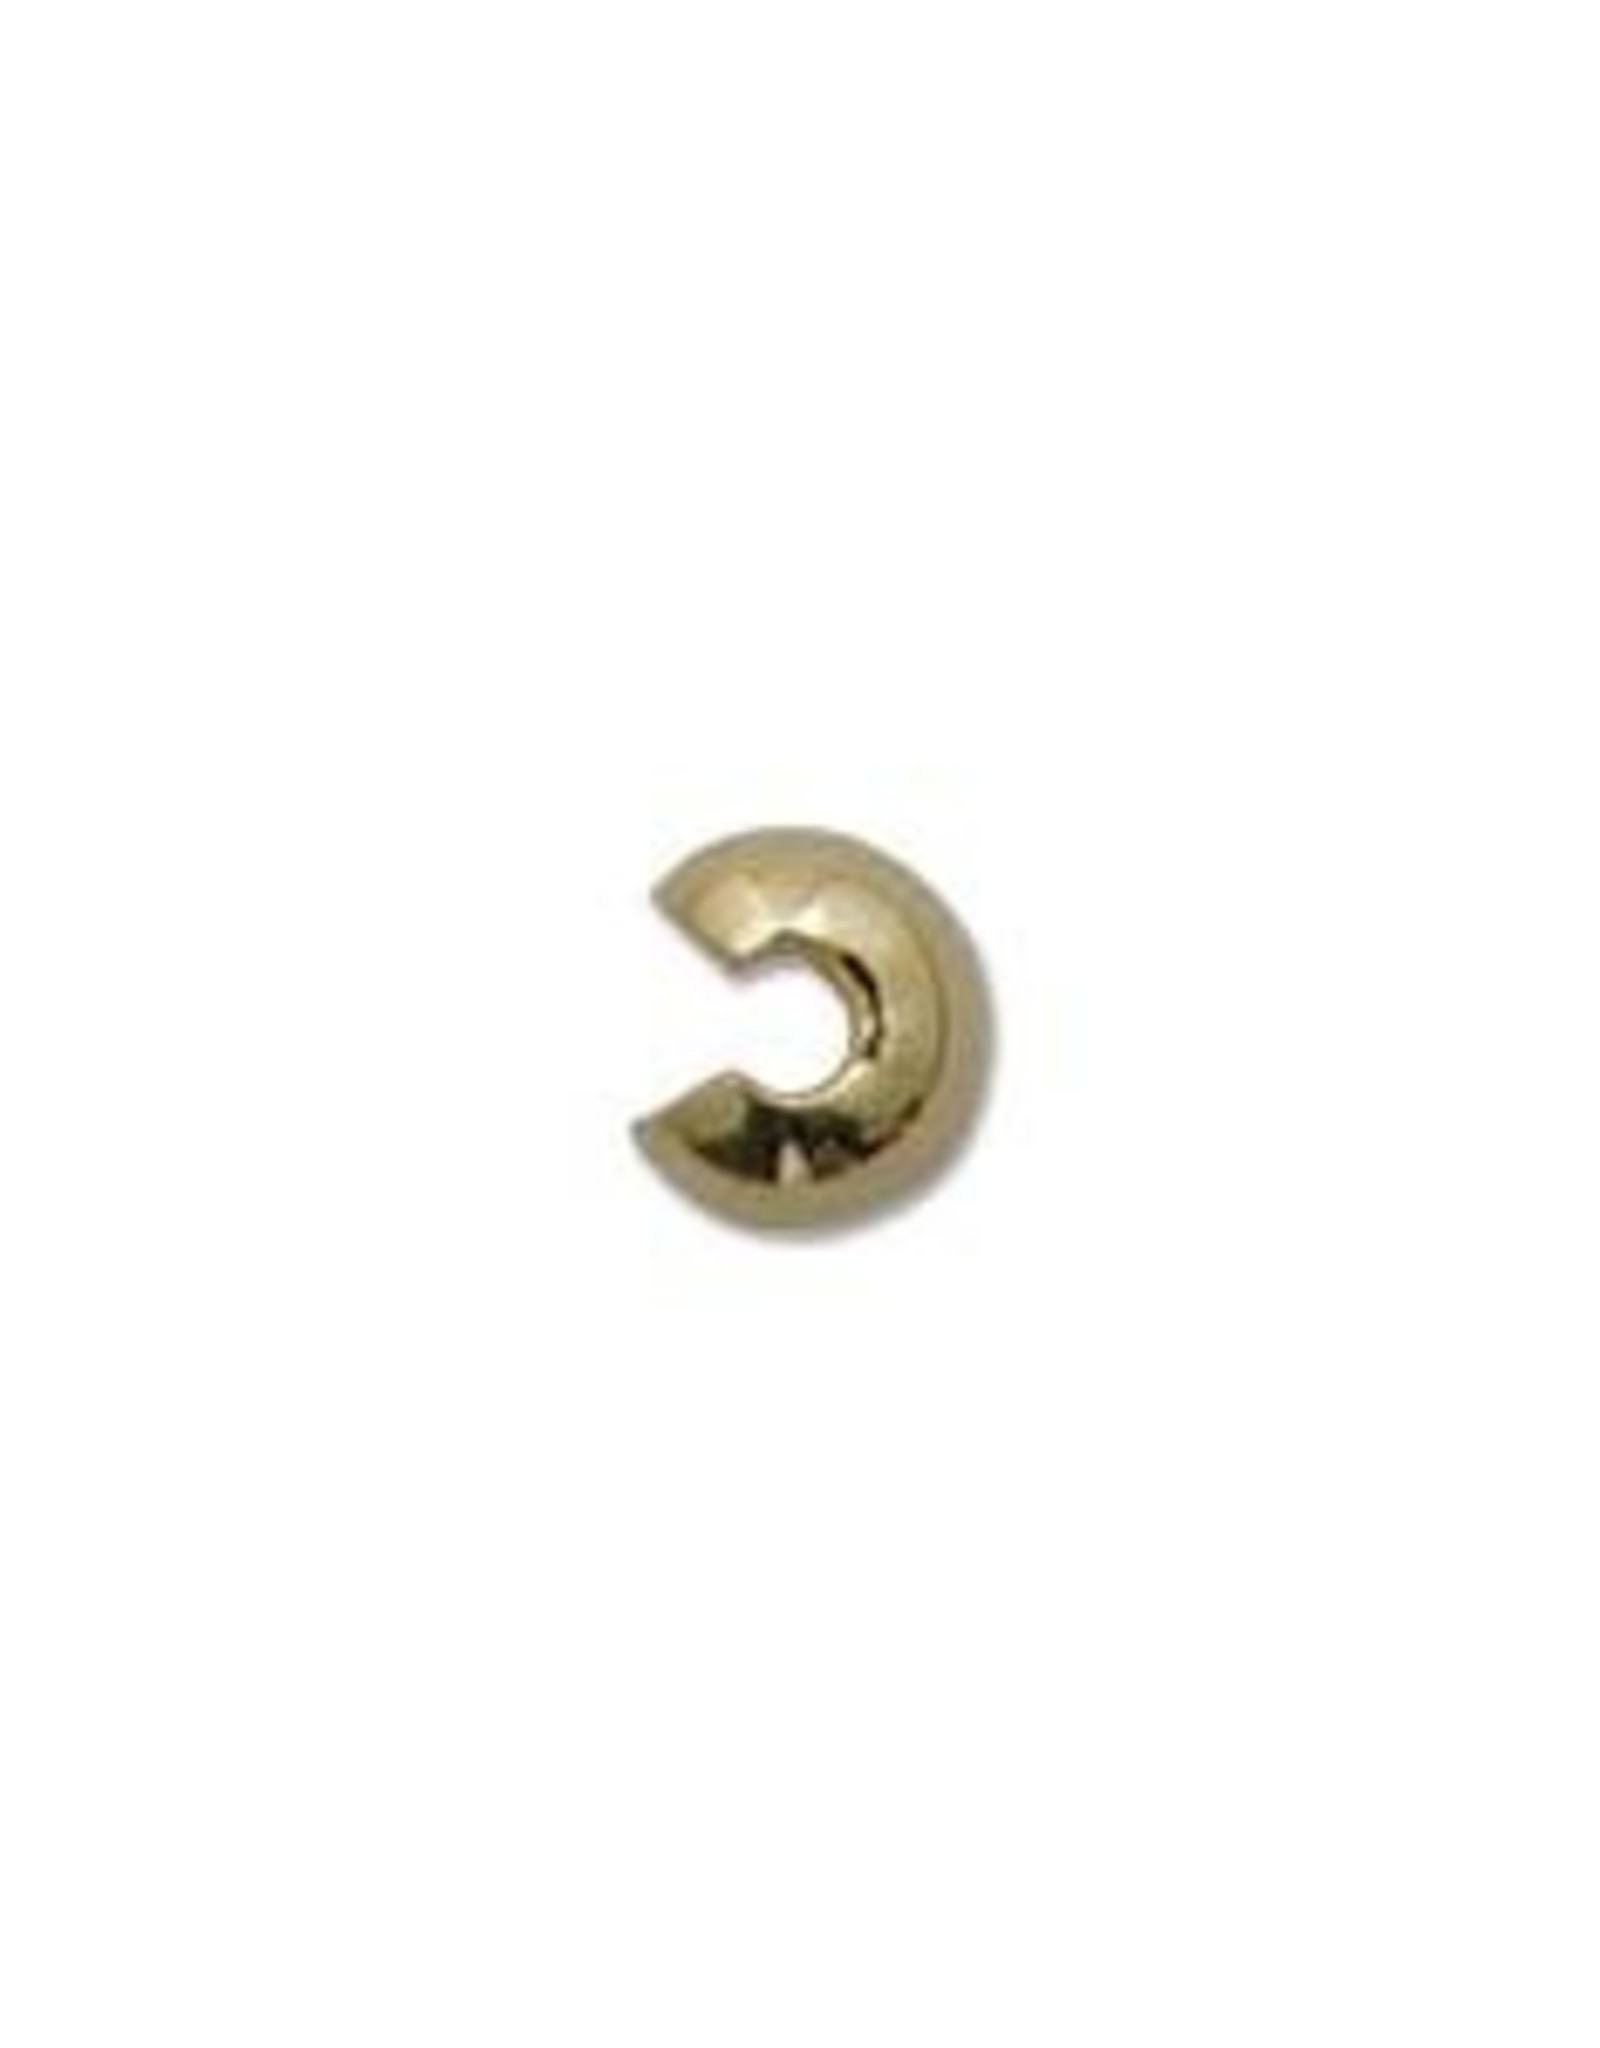 4mm Crimp Cover Gold Plate Qty 144